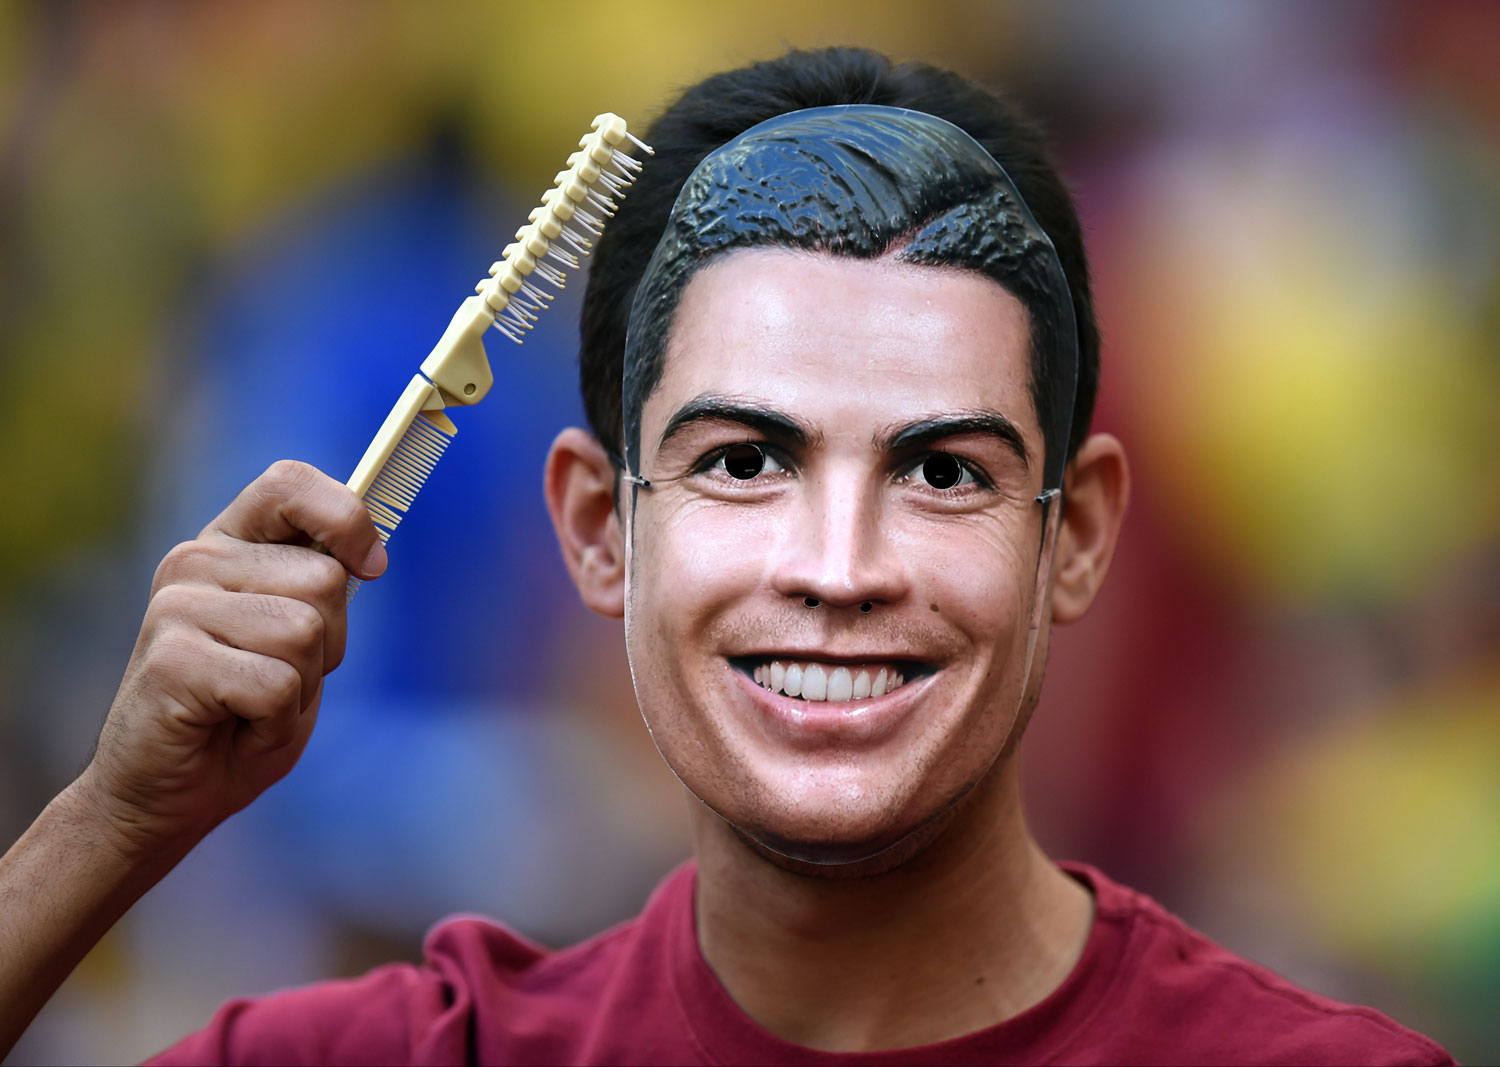 A Portugal supporter wears a Ronaldo mask before the match between Portugal and Ghana at the Estadio Nacional in Brasilia, Brazil on June 26, 2014.